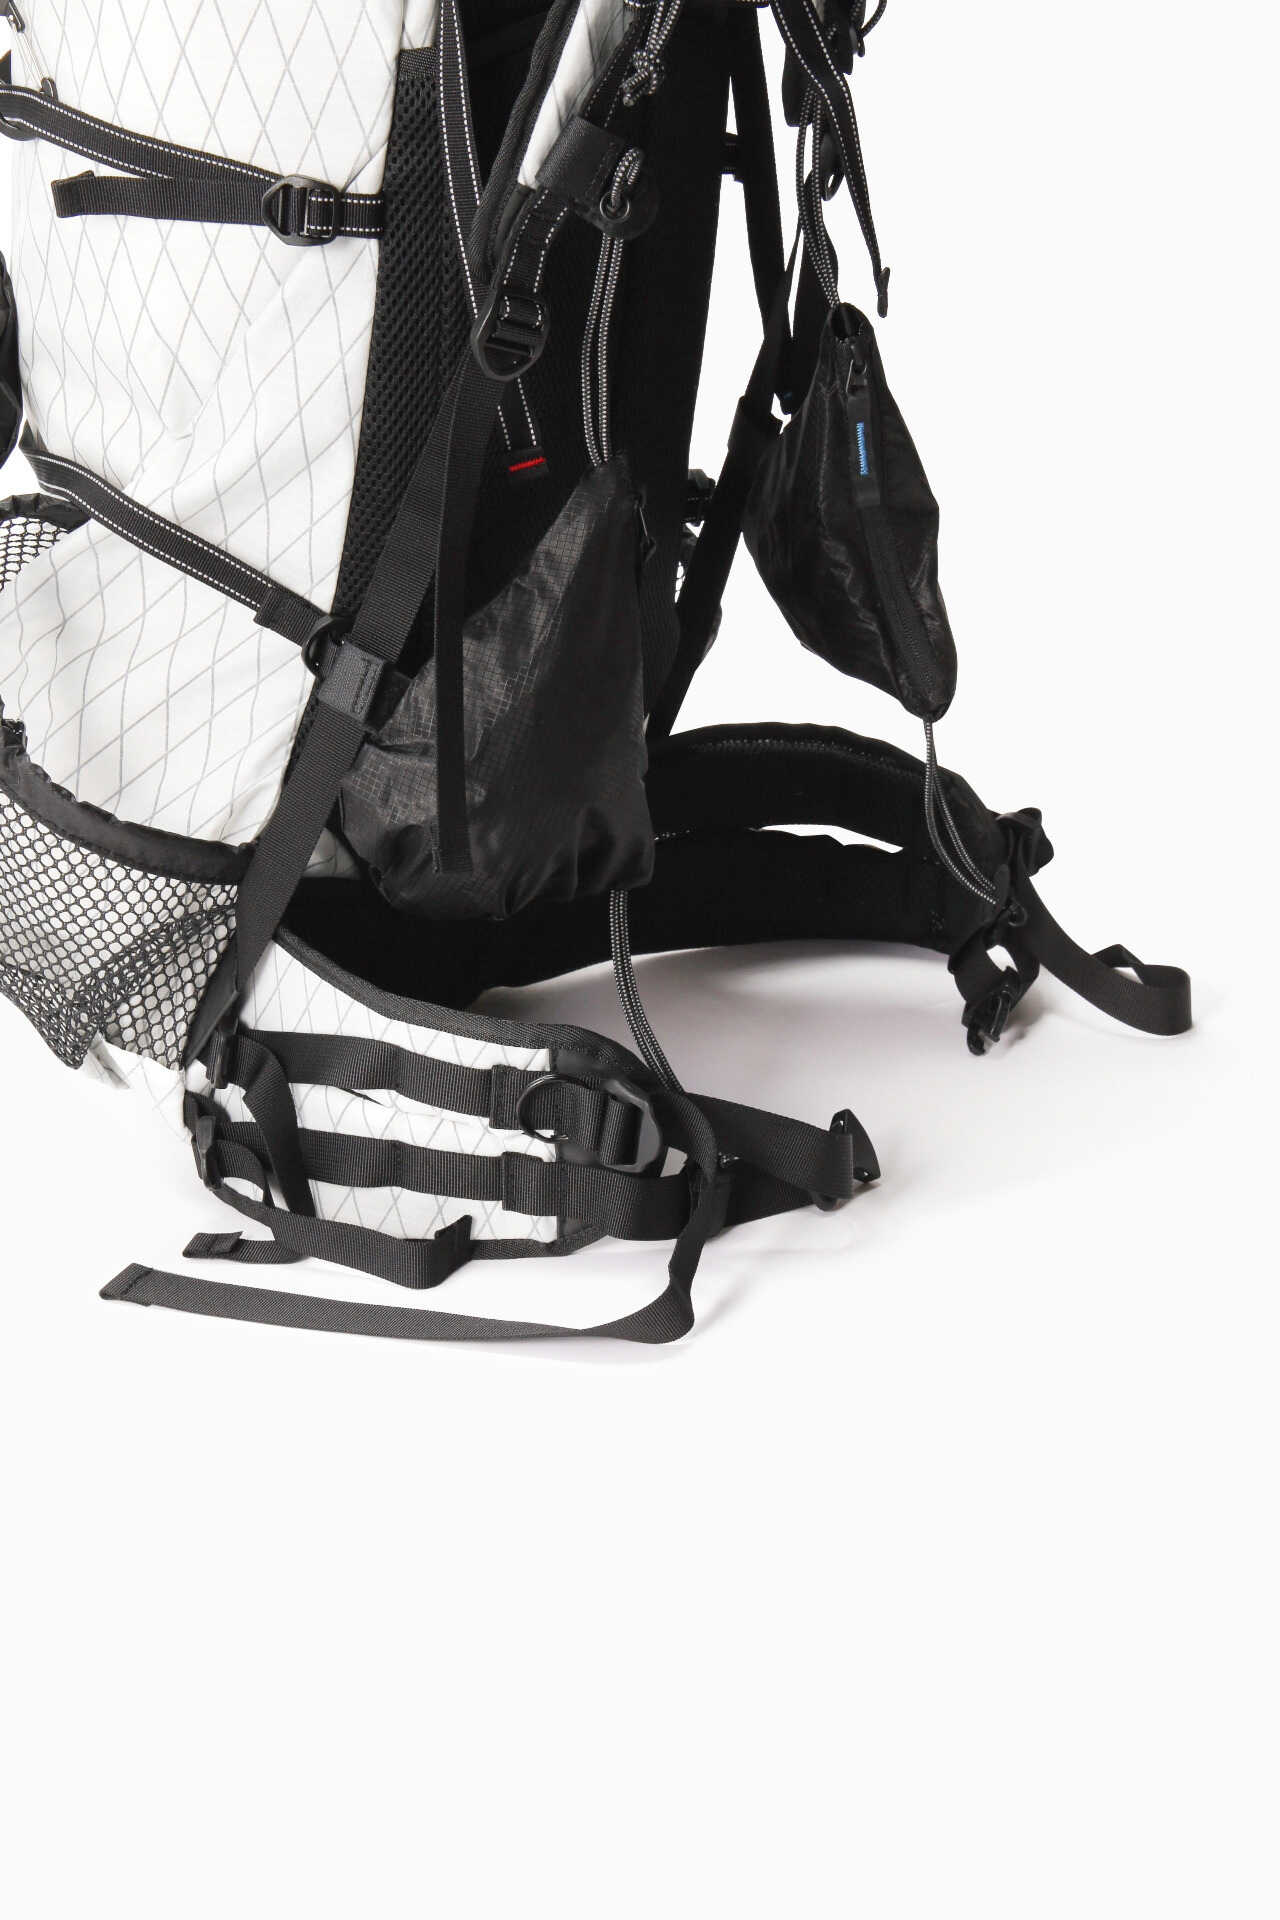 X-Pac 45L backpack | bags | and wander ONLINE STORE